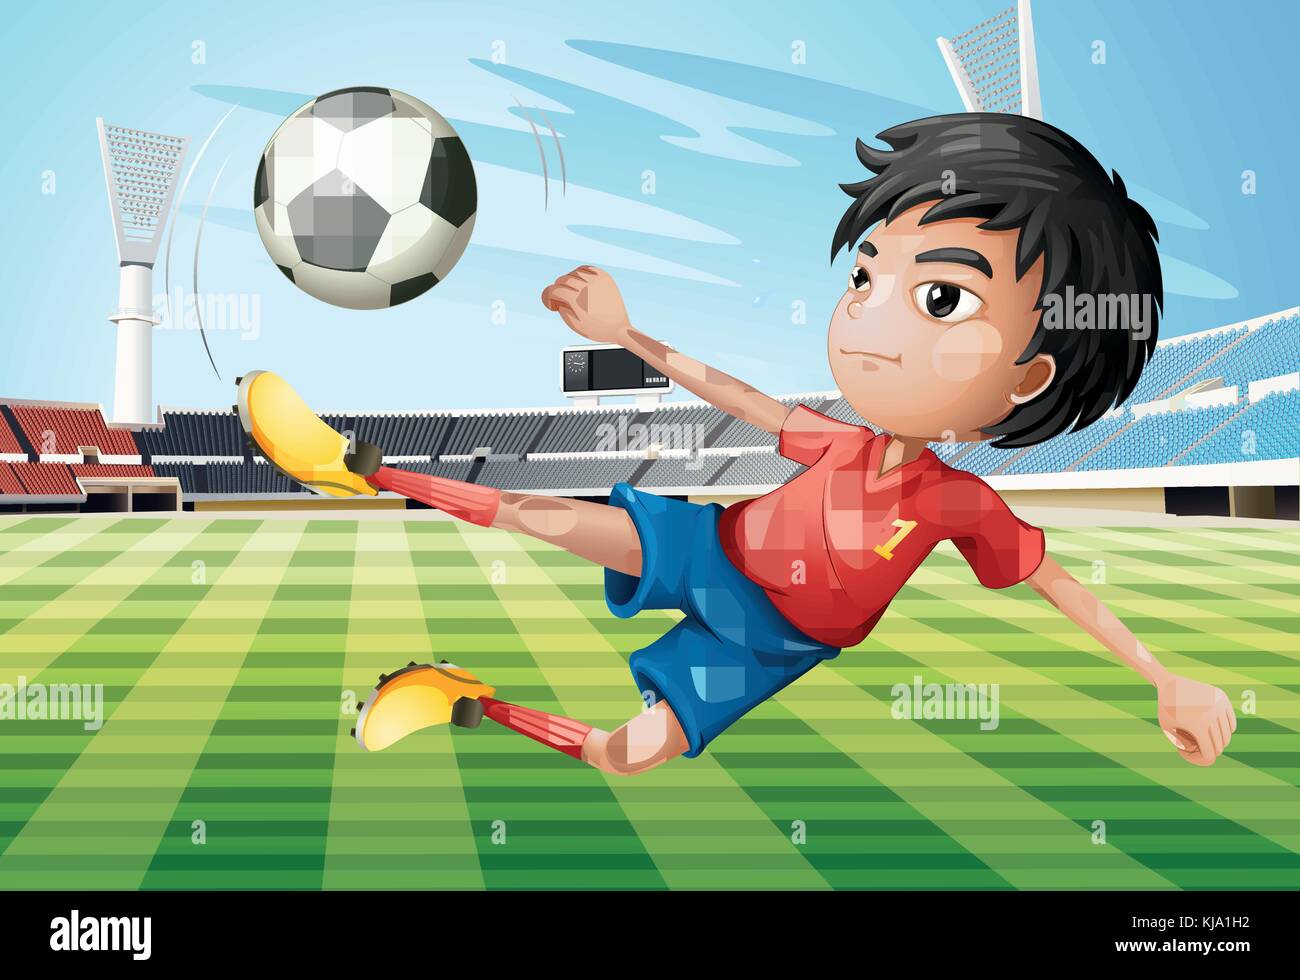 Illustration of a boy playing soccer at the soccer field Stock Vector